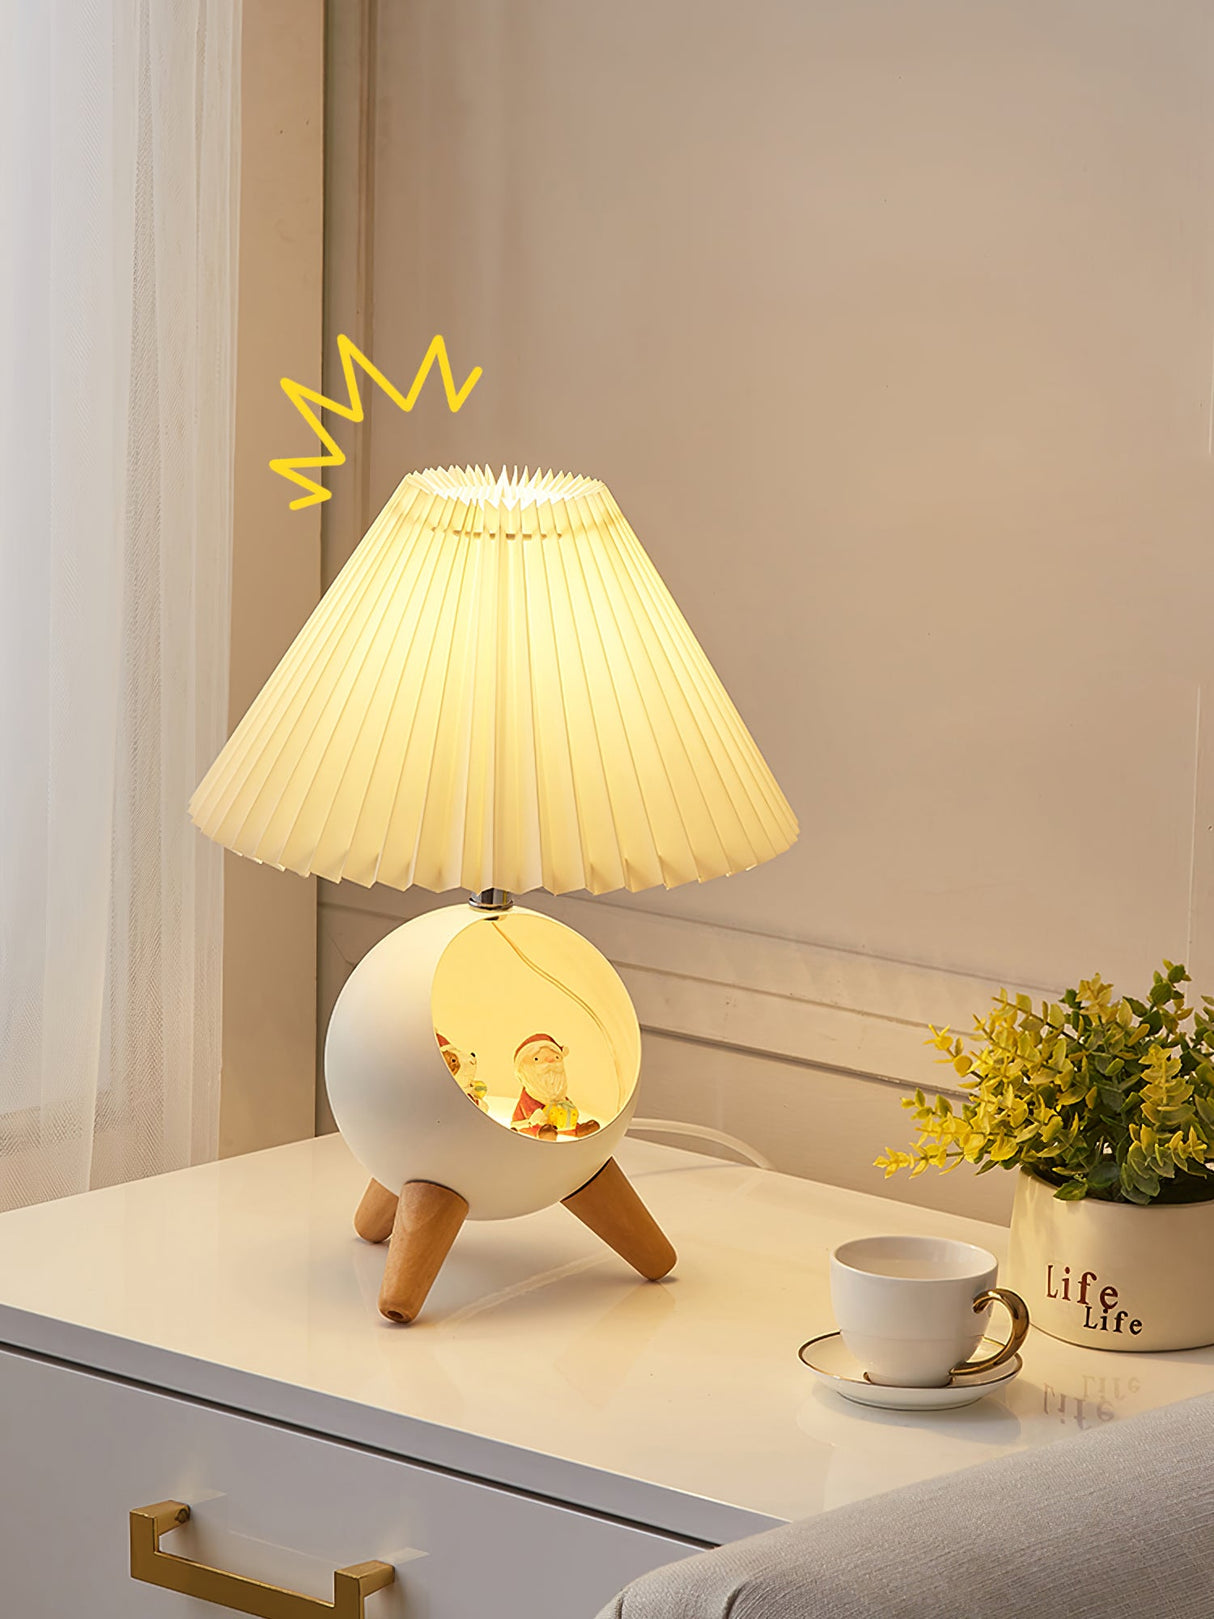 Wood Small Table Lamp